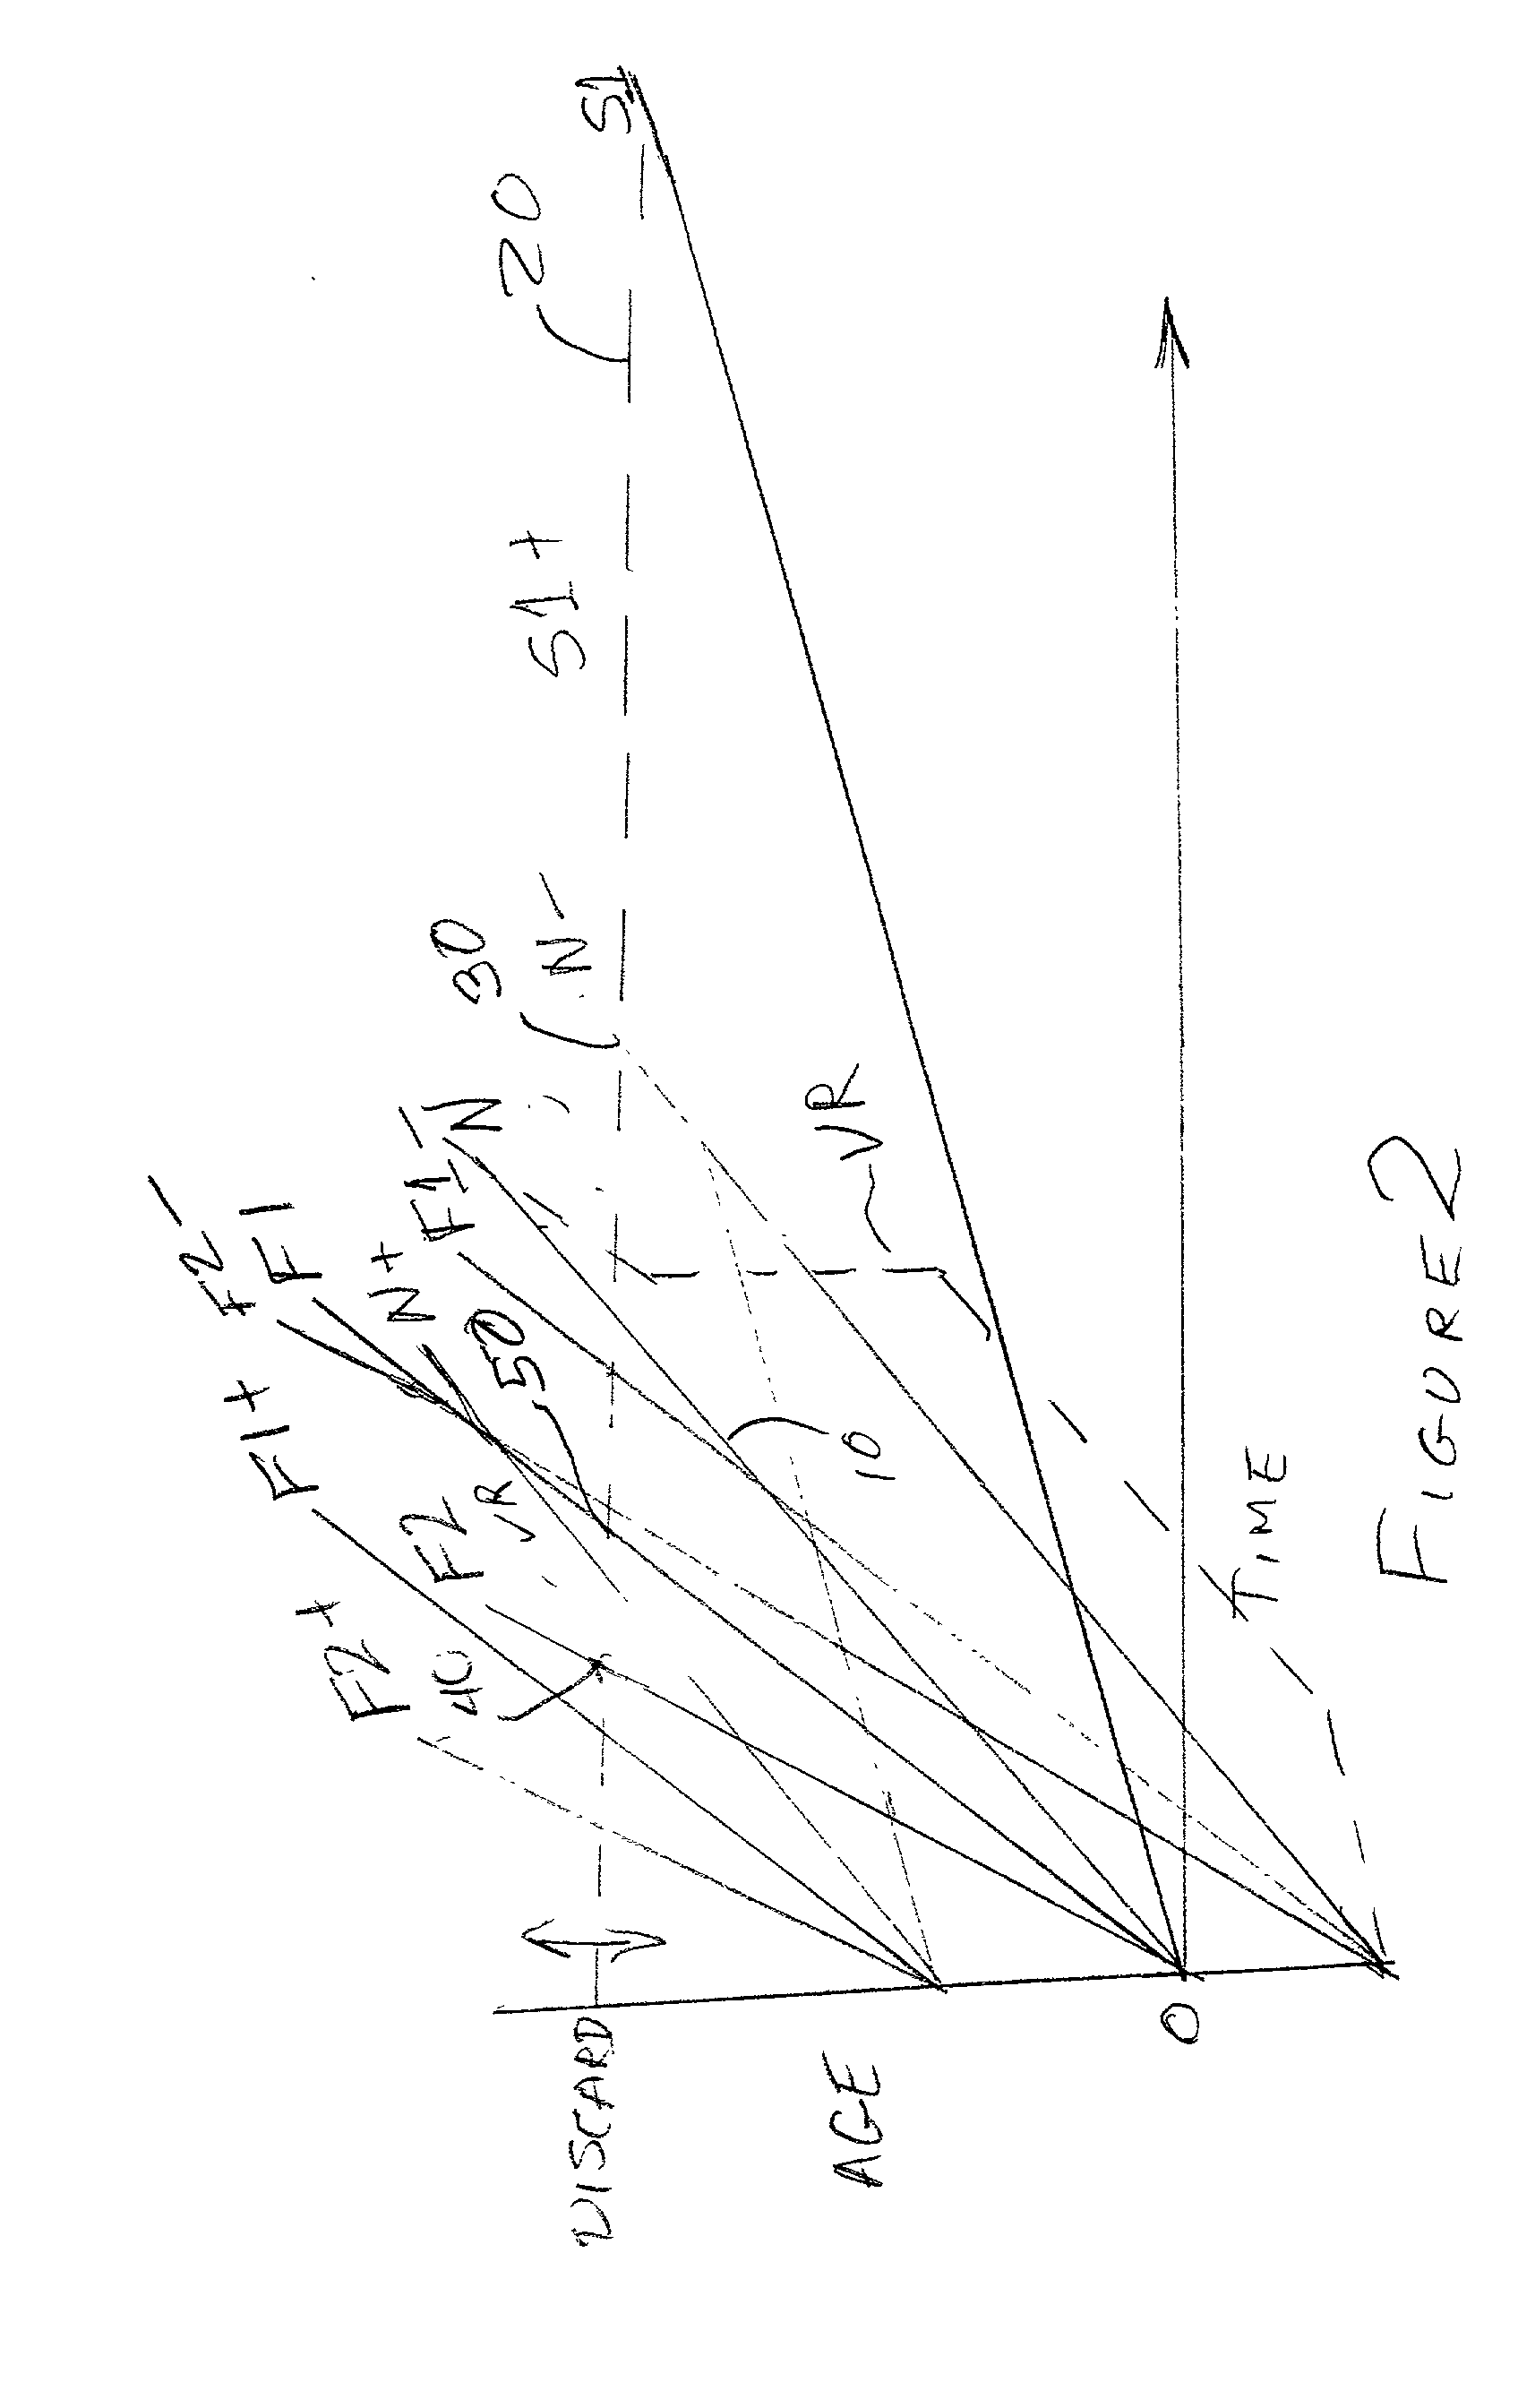 Directed least recently used cache replacement method